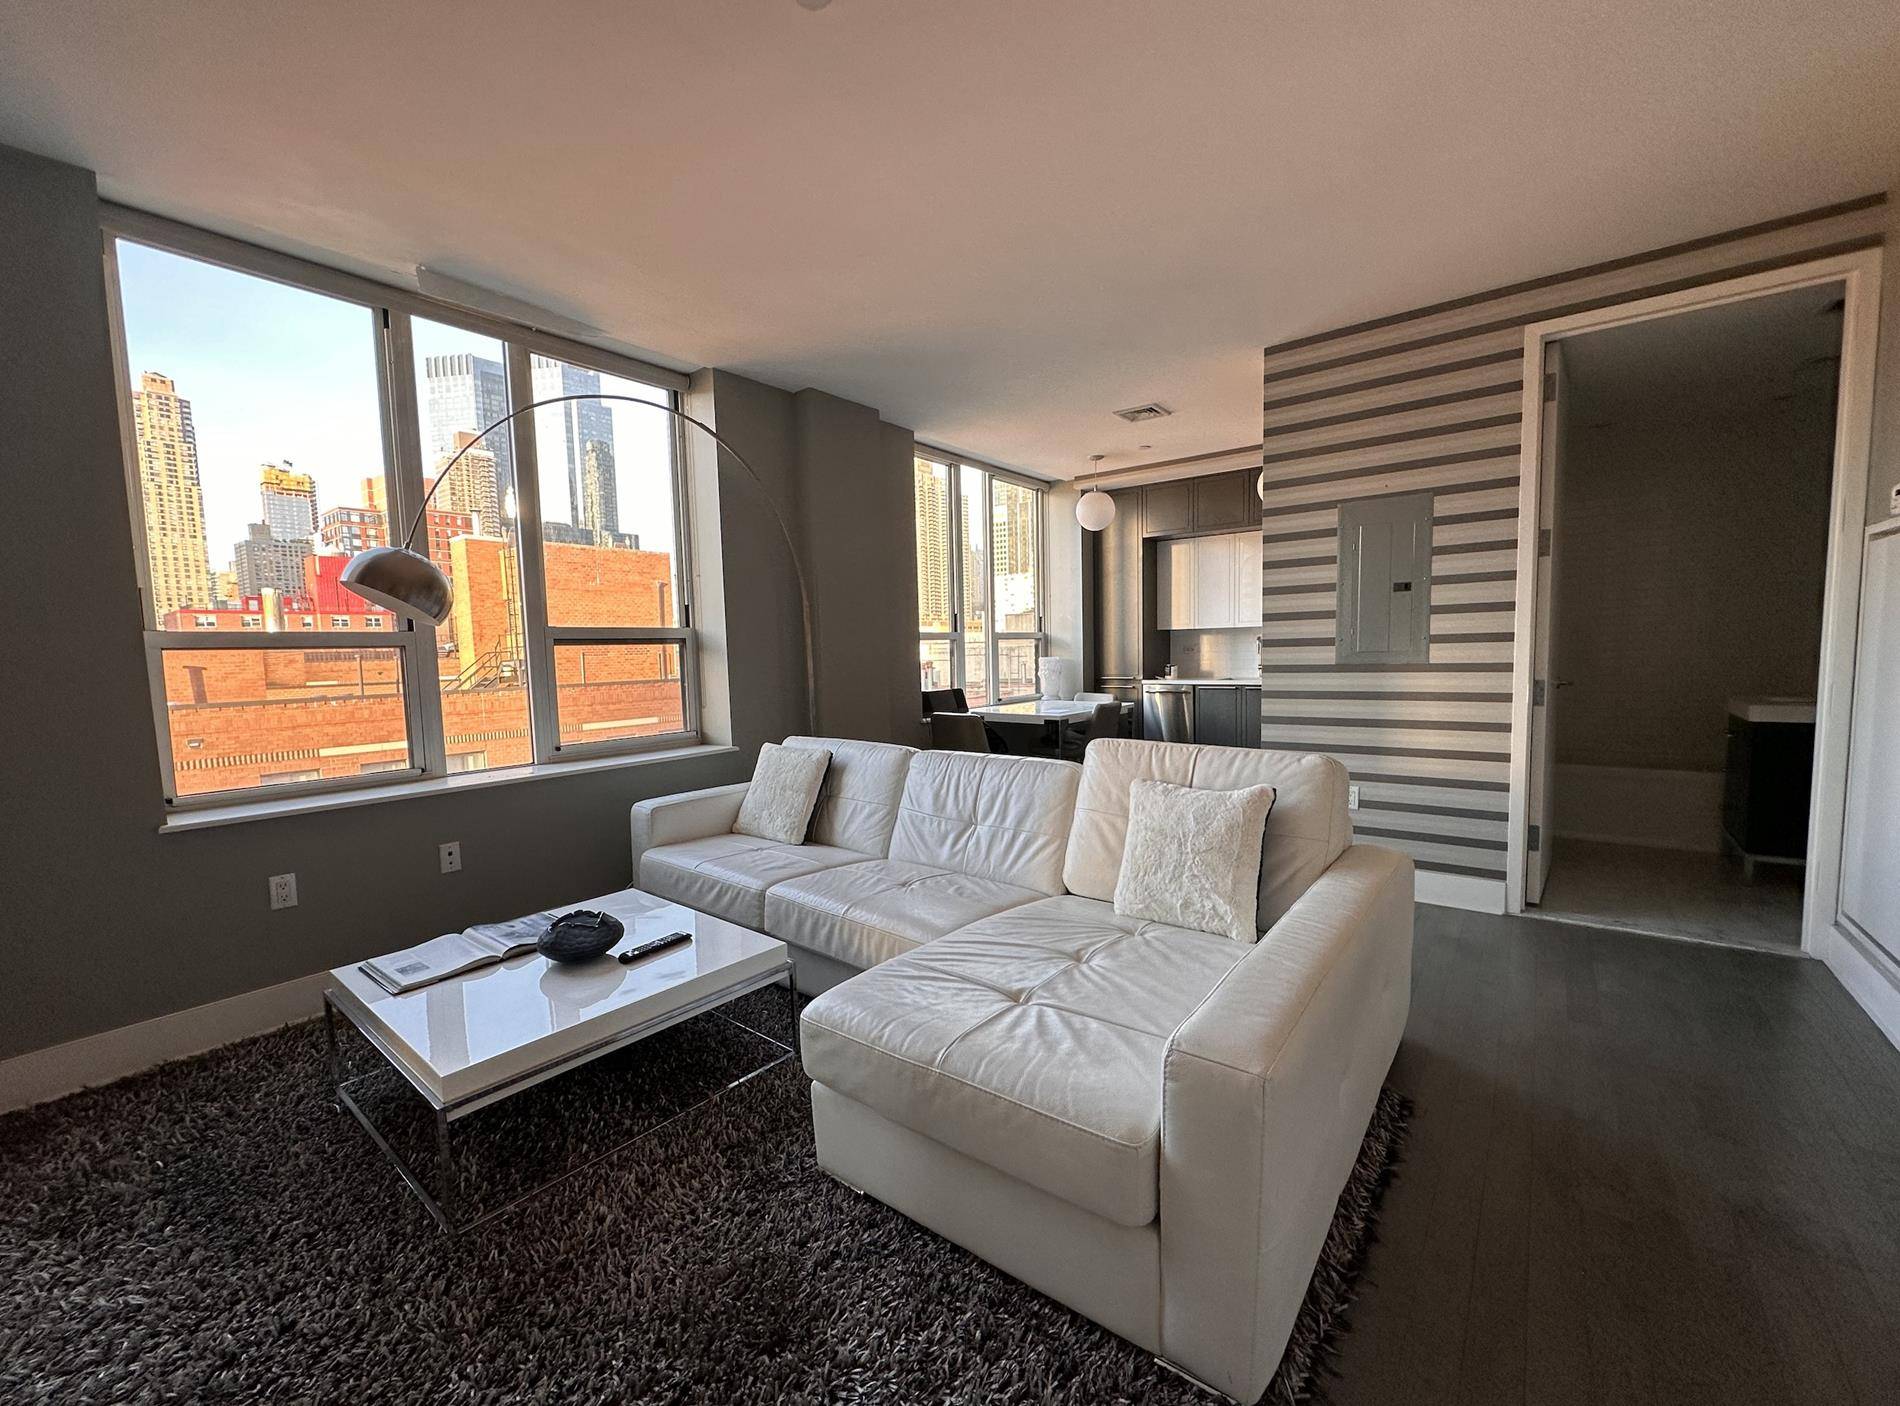 FURNISHED HOMEWelcome to 416 West 52nd Street 700.